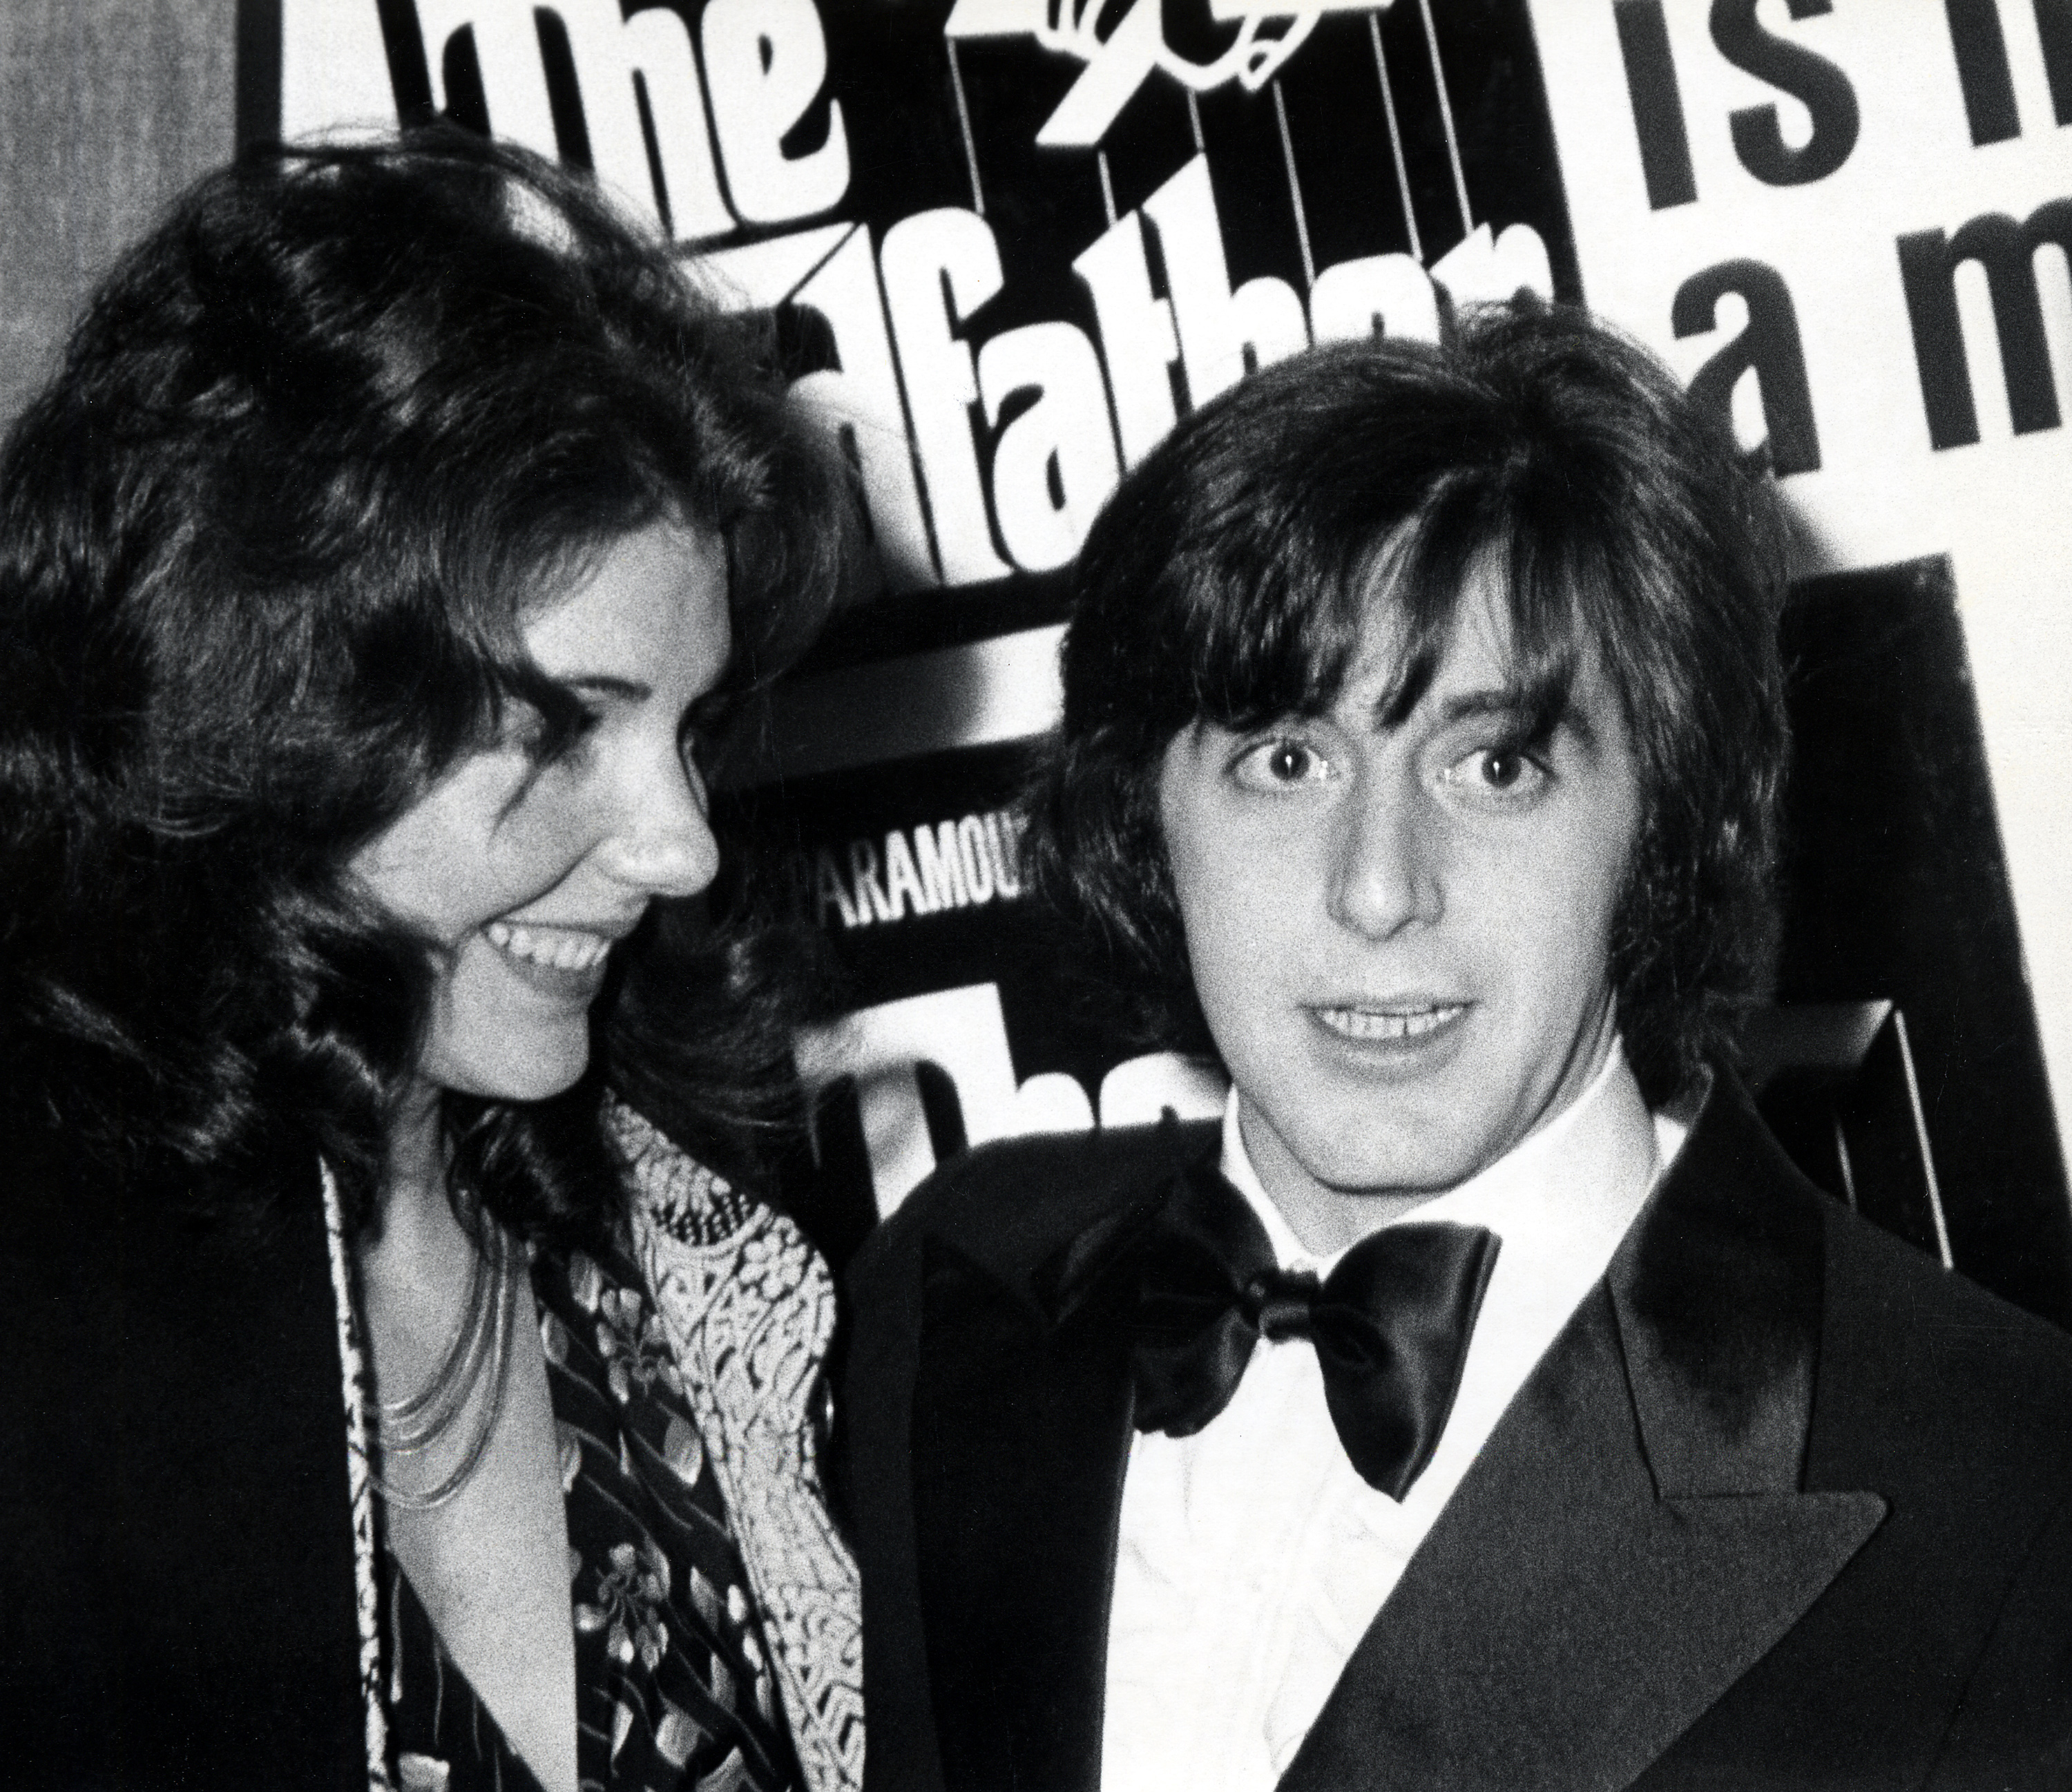 Al Pacino and Jill Clayburgh attend the "The Godfather" premiere | Source: Getty Images